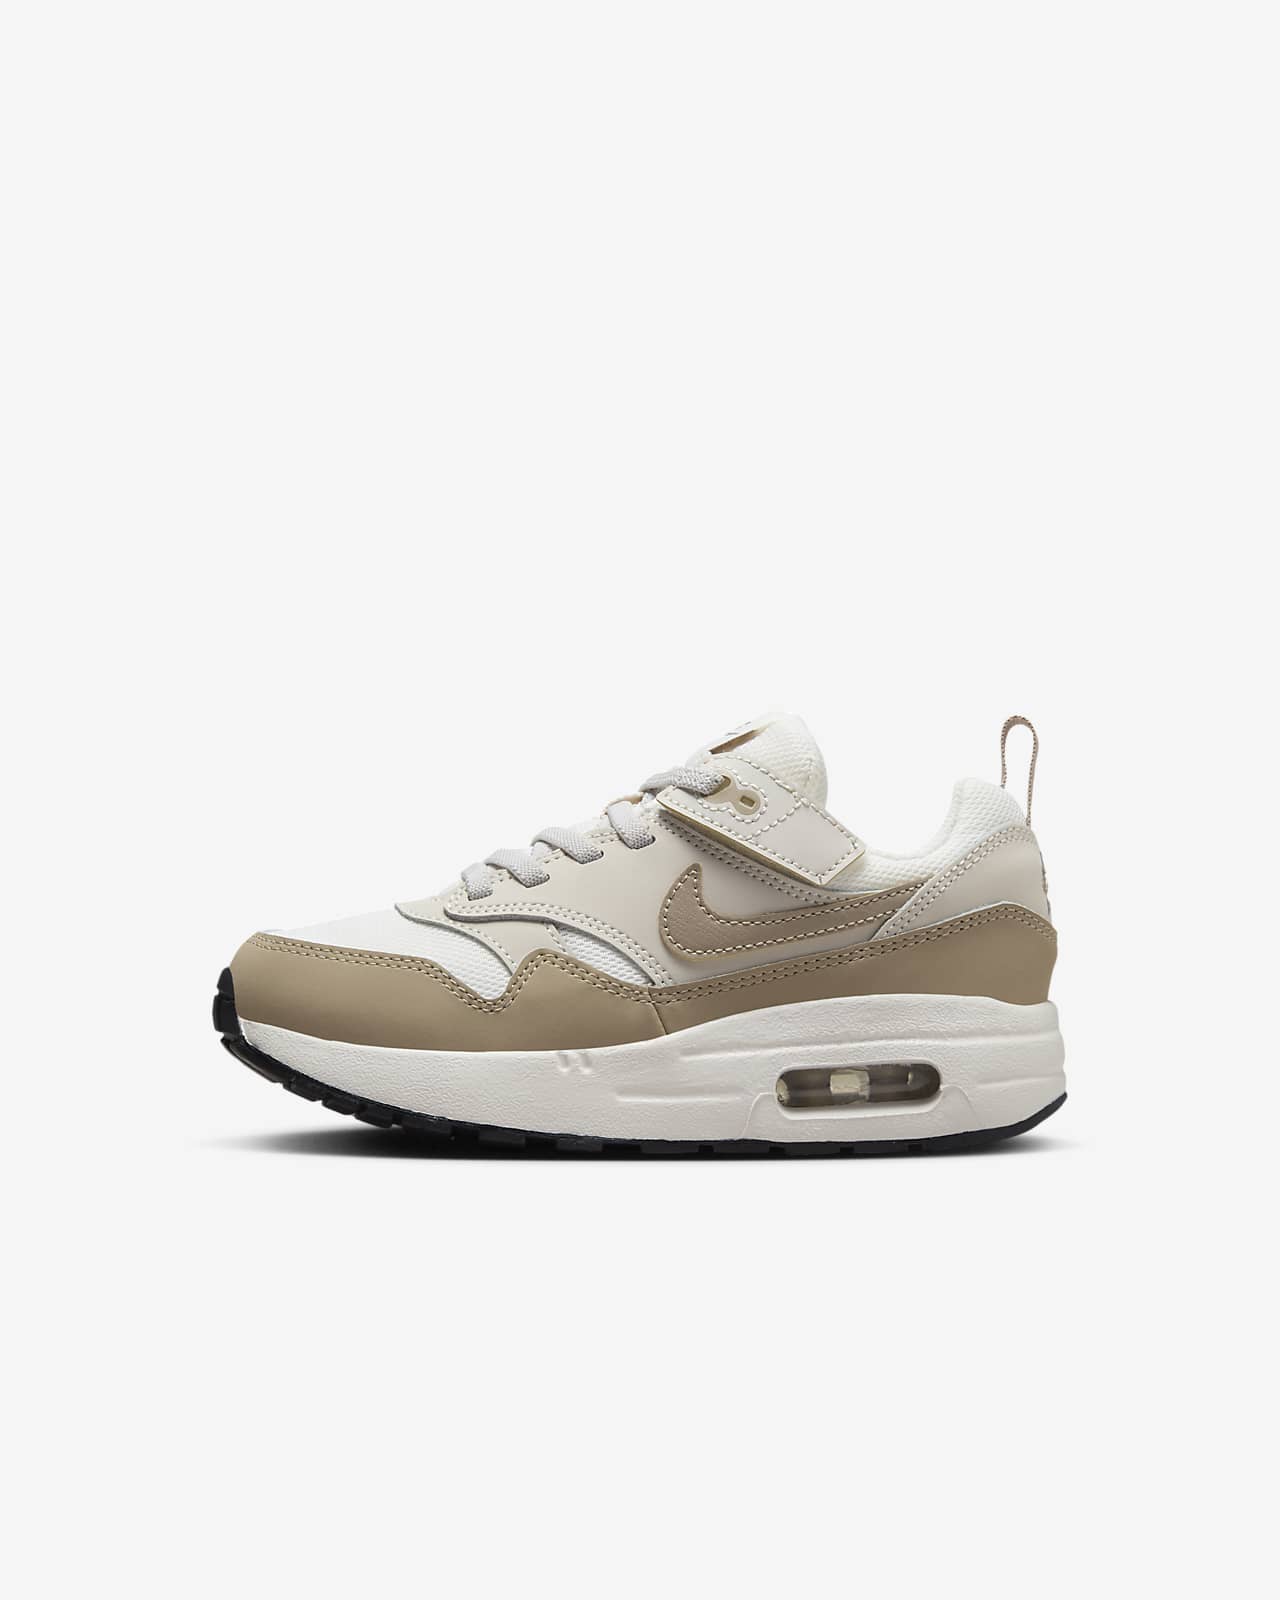 Nike Air Max 1 EasyOn Younger Kids' Shoes